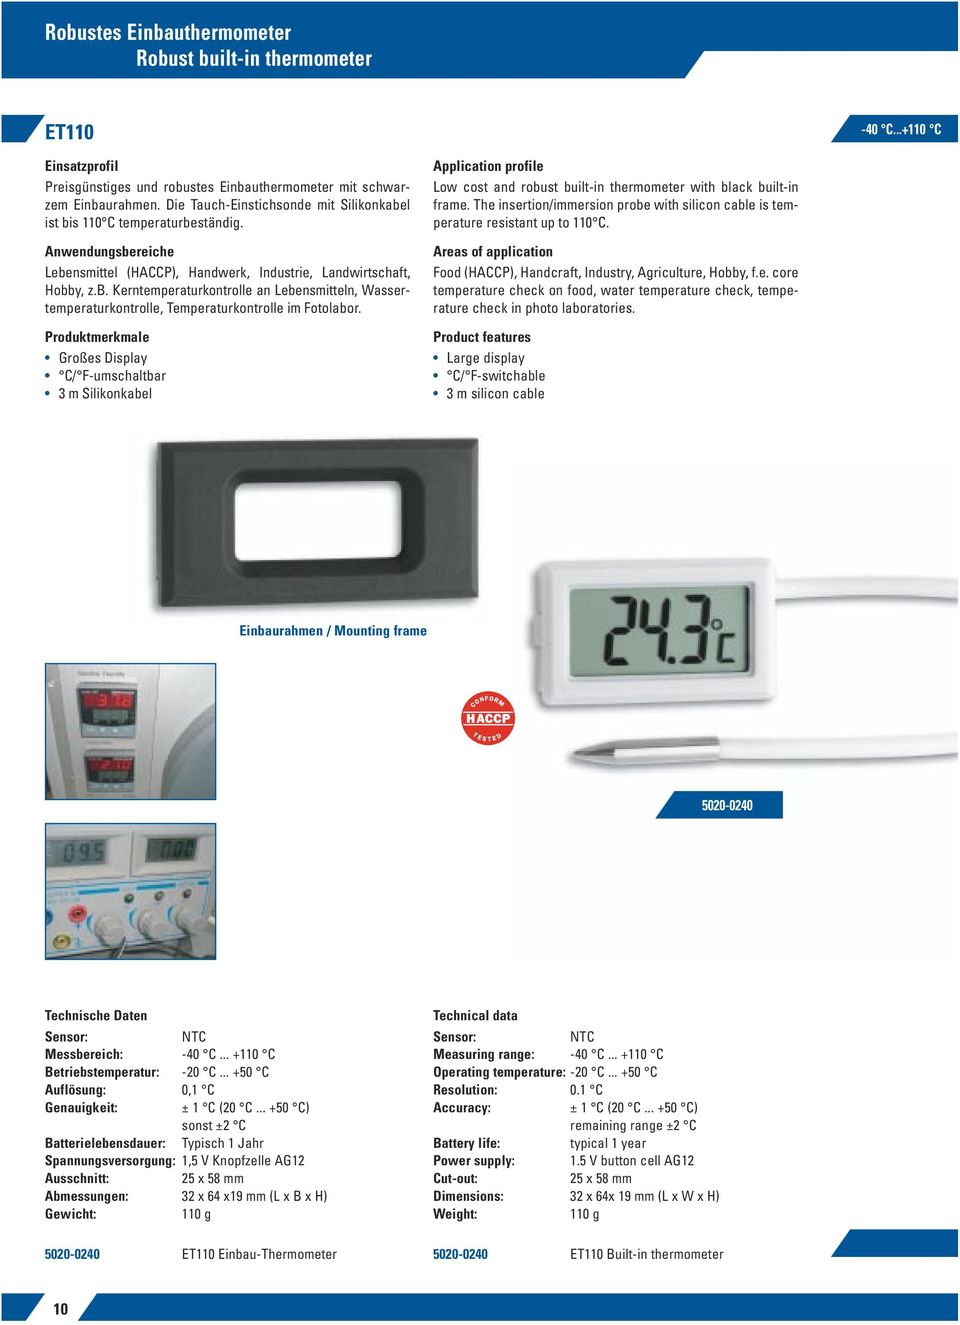 Großes Display C/ F-umschaltbar 3 m Silikonkabel Low cost and robust built-in thermometer with black built-in frame.